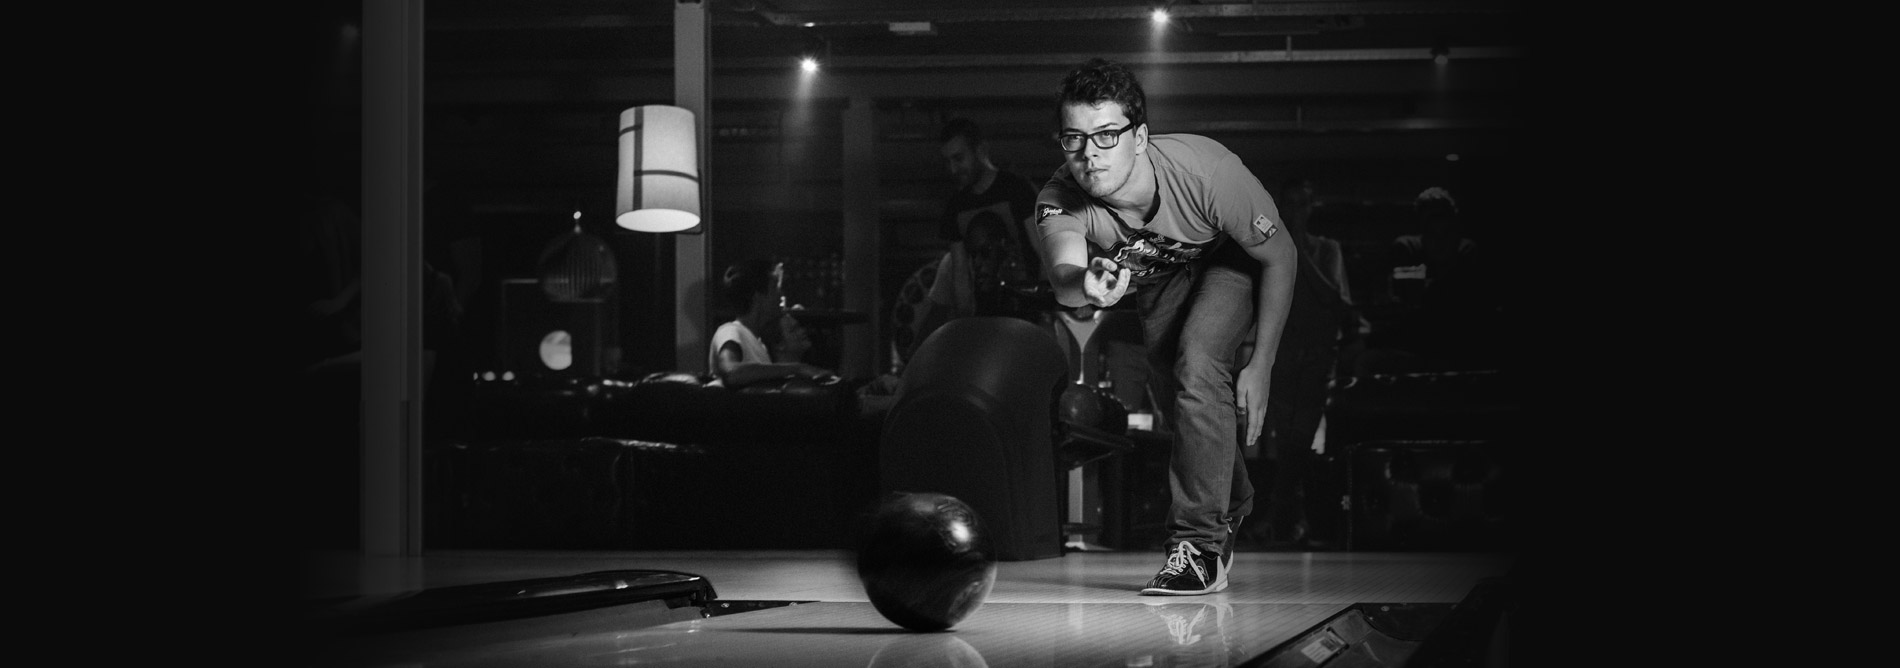 Bowling-QubicaAMF-lanes-spl-boutique-experience-banner.jpg